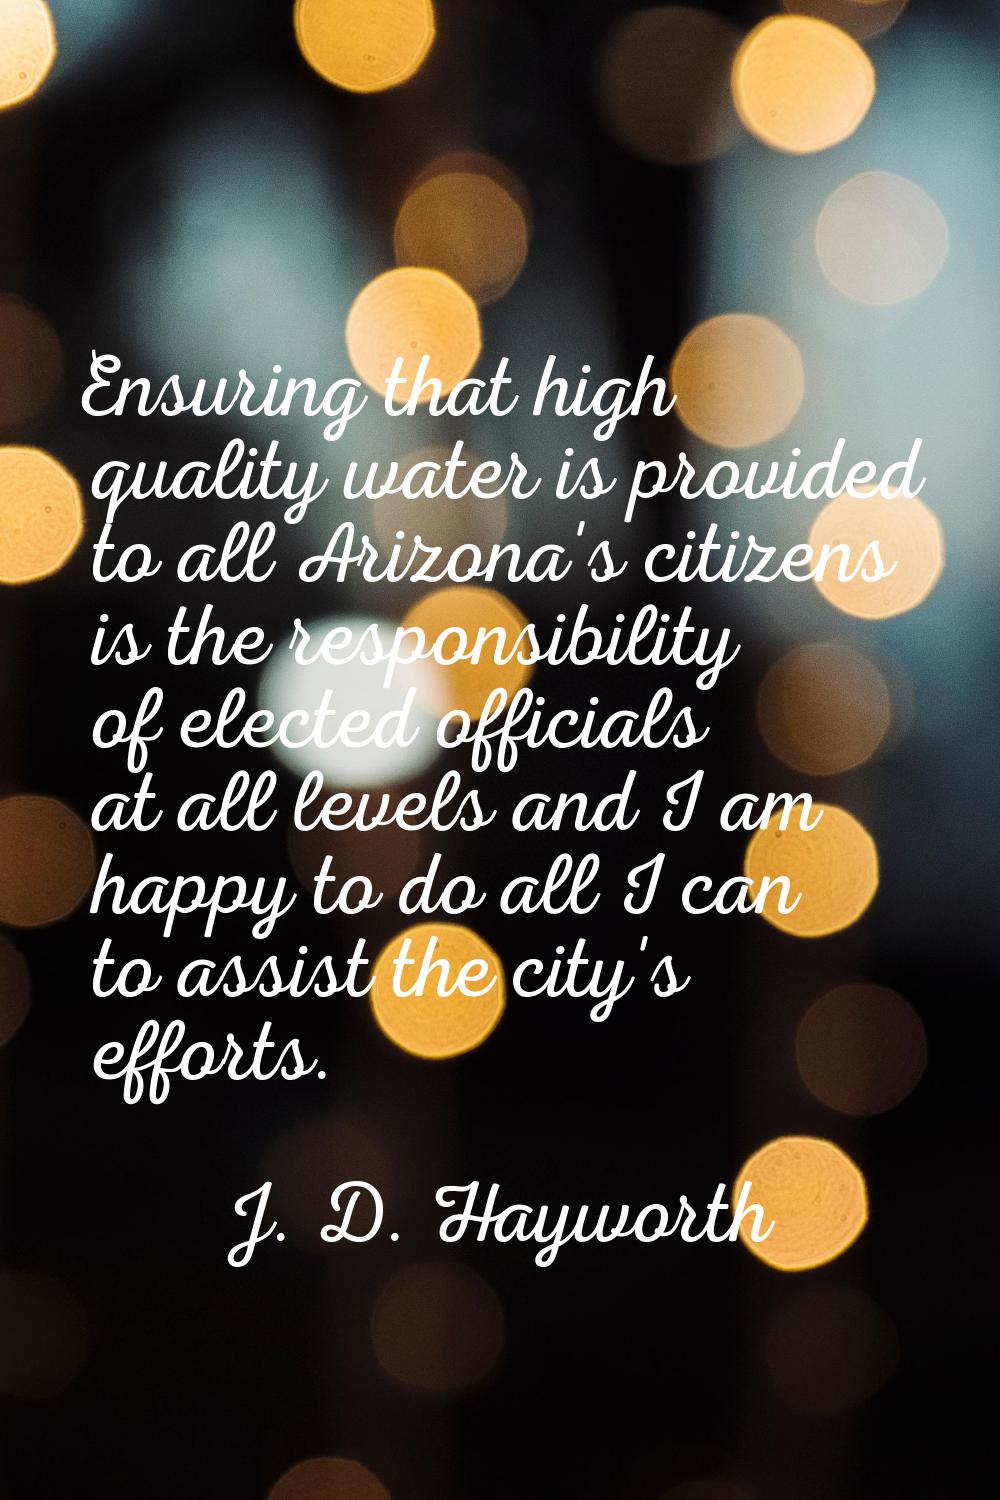 Ensuring that high quality water is provided to all Arizona's citizens is the responsibility of ele